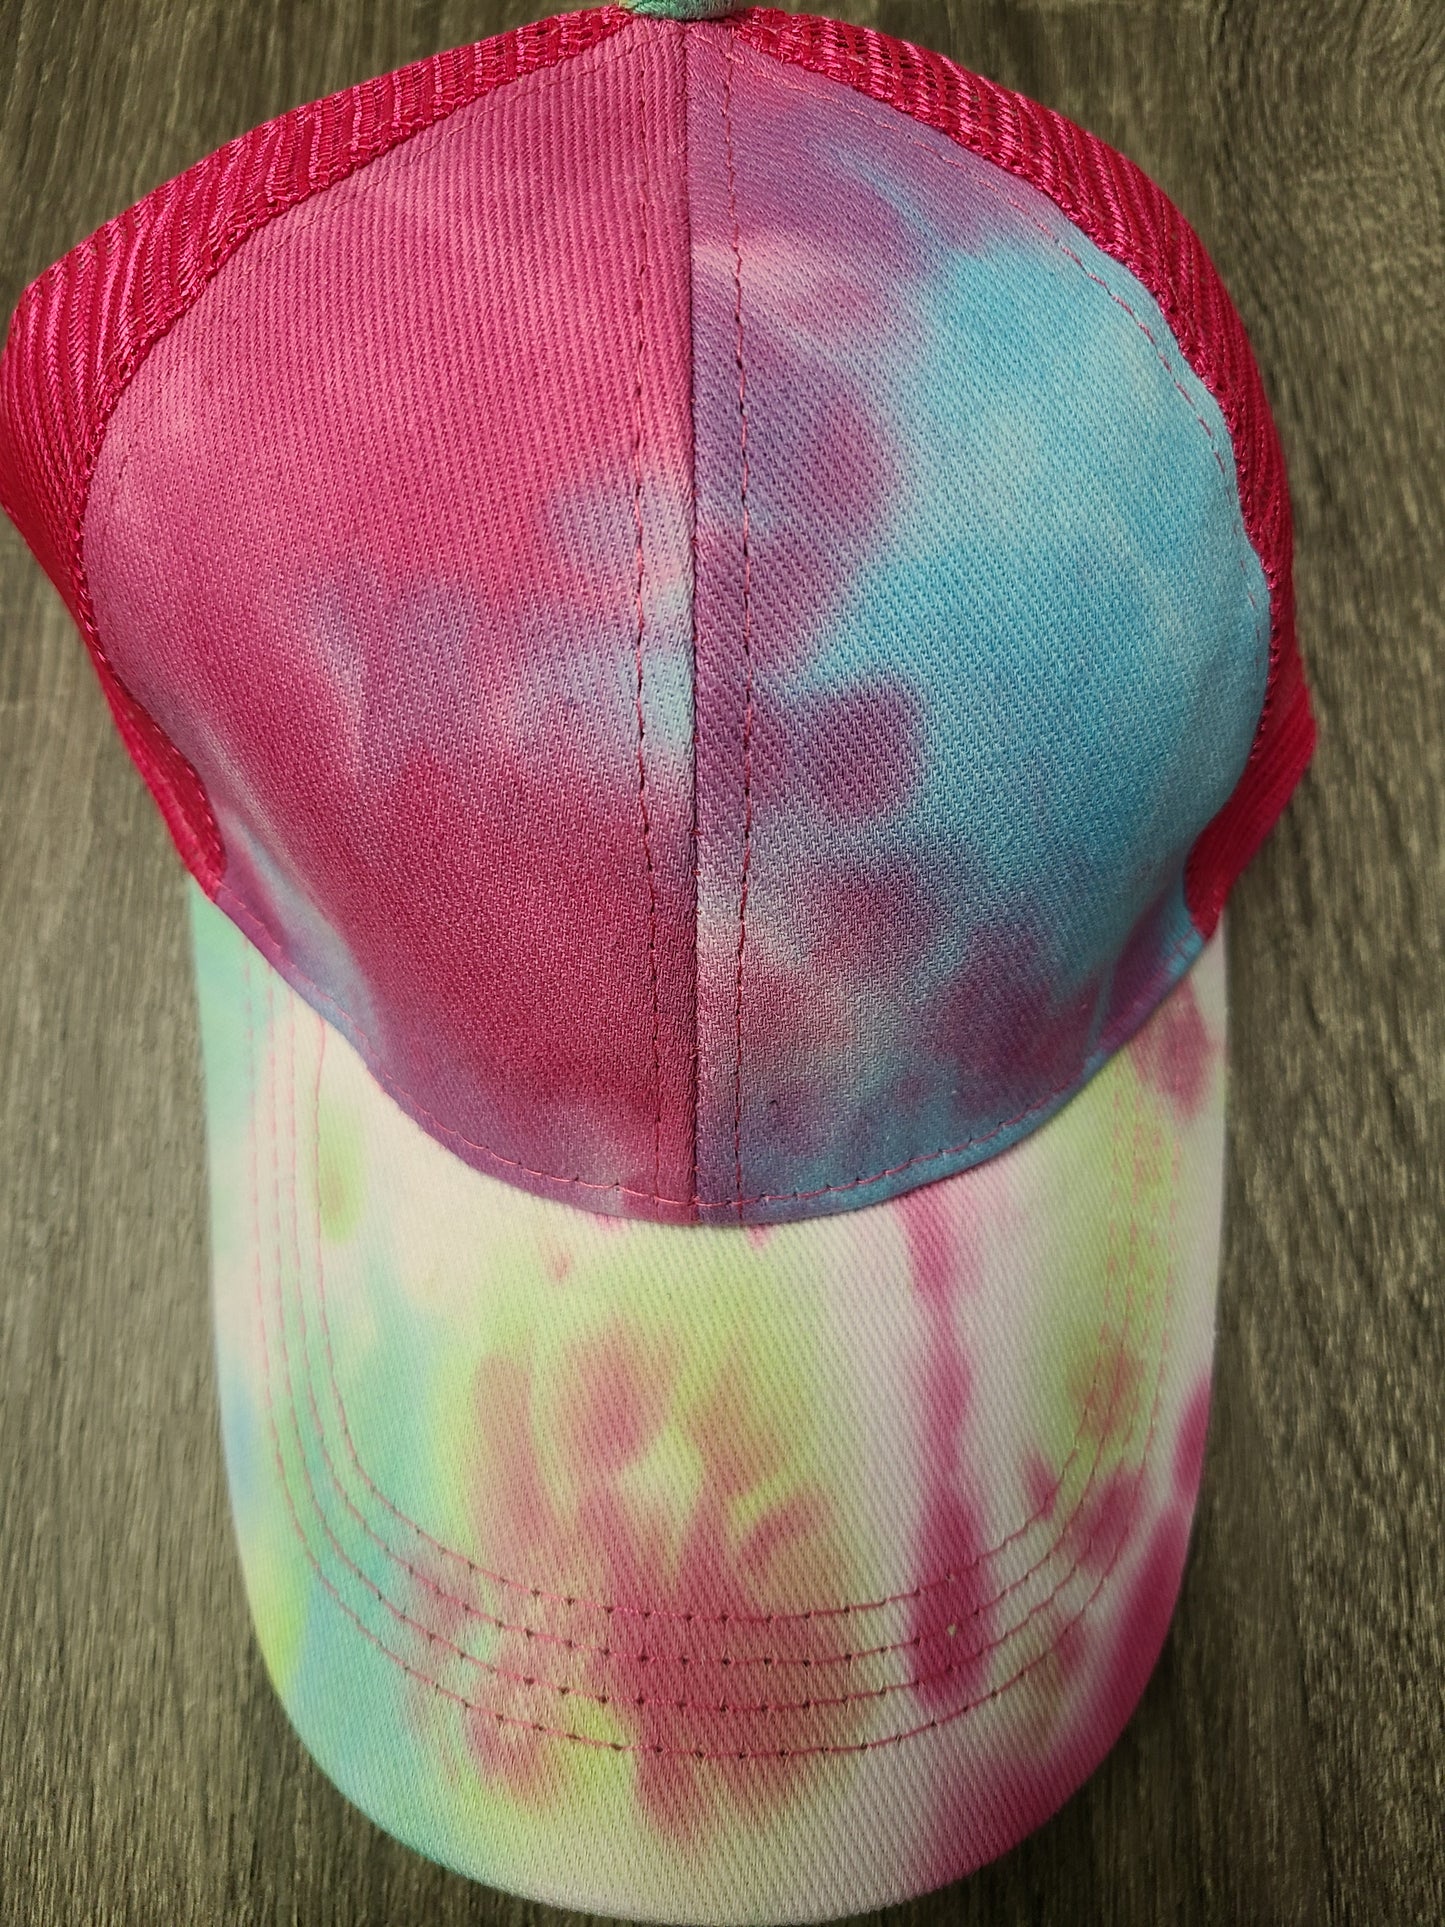 Distressed Pony Tail Hat - Tie Dye (no two are identical)